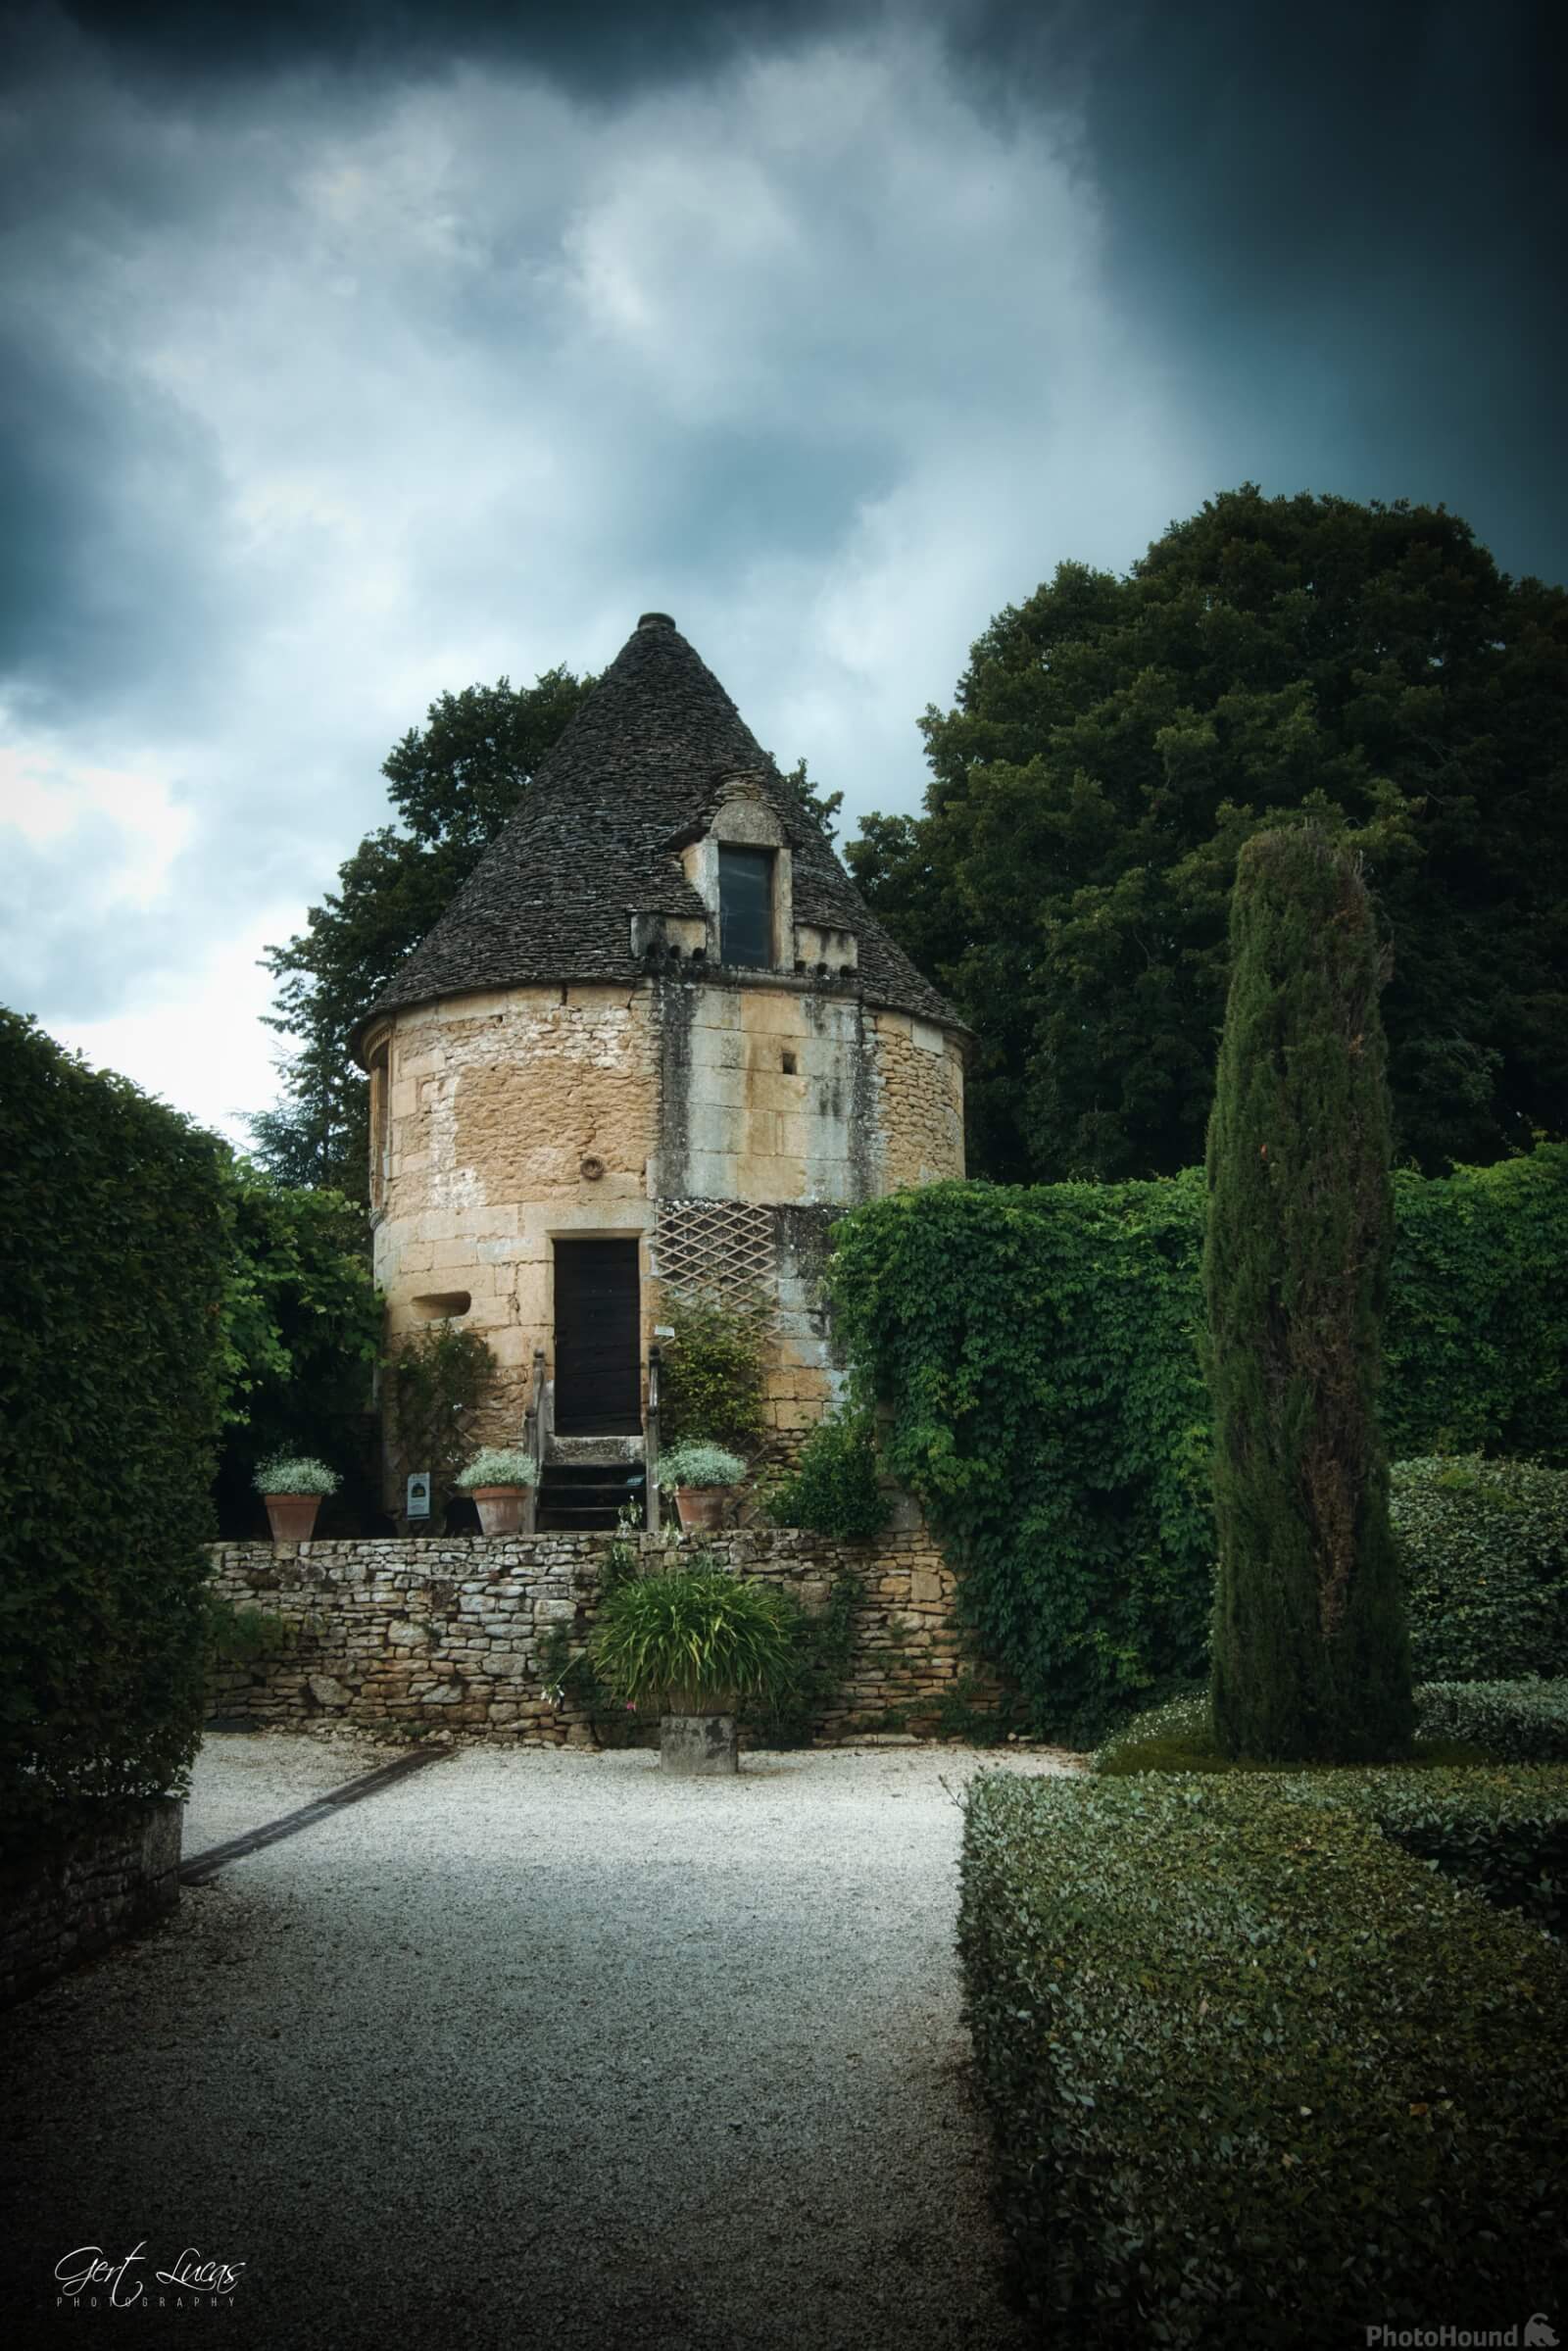 Image of Gardens of Chateau de Losse by Gert Lucas